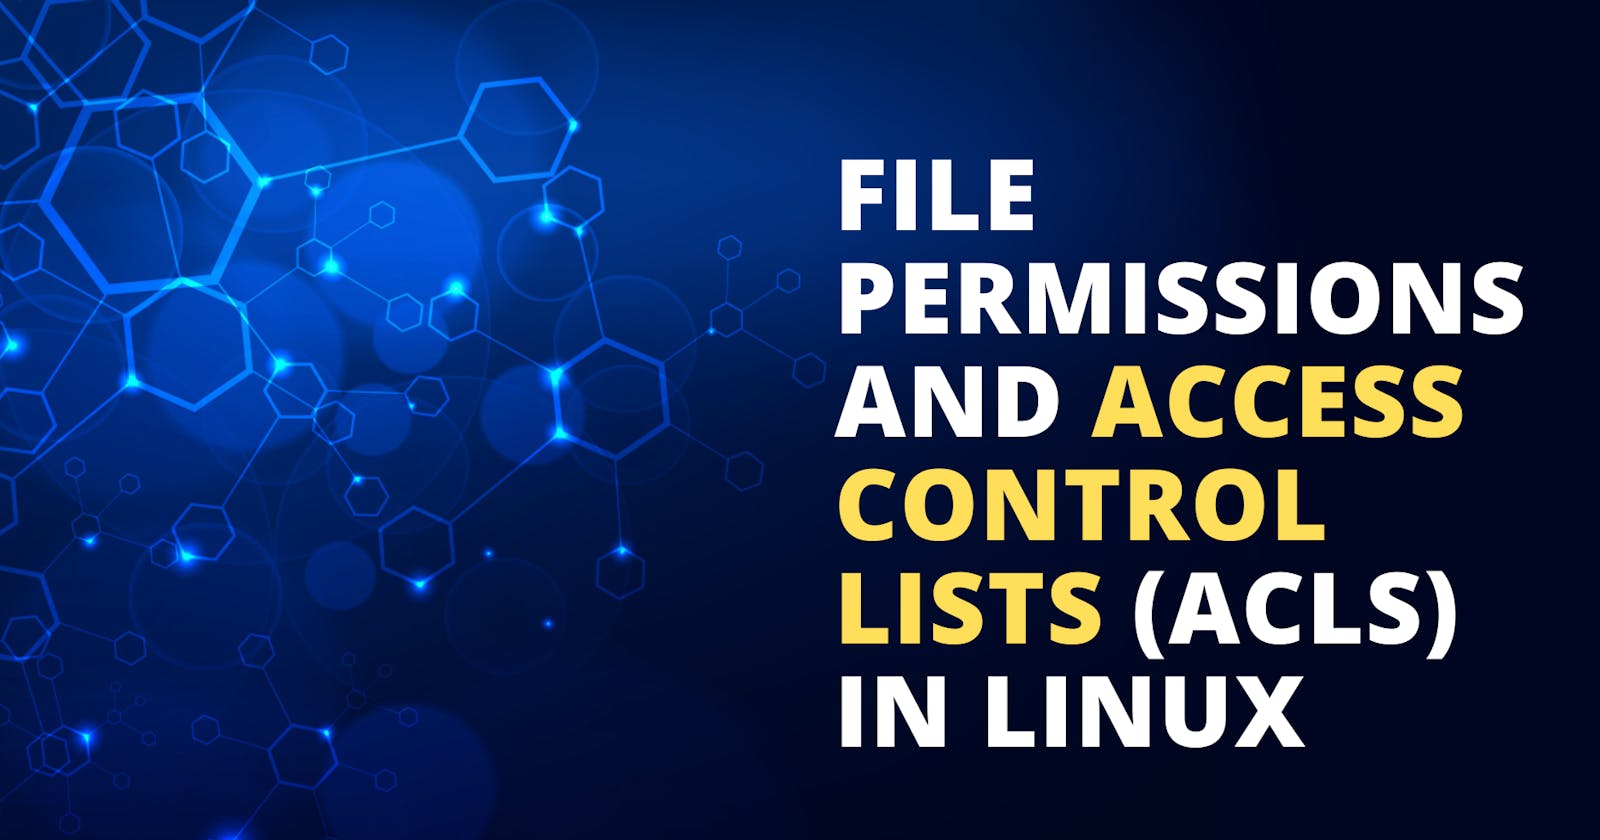 File Permissions and Access Control Lists (ACLs) in Linux